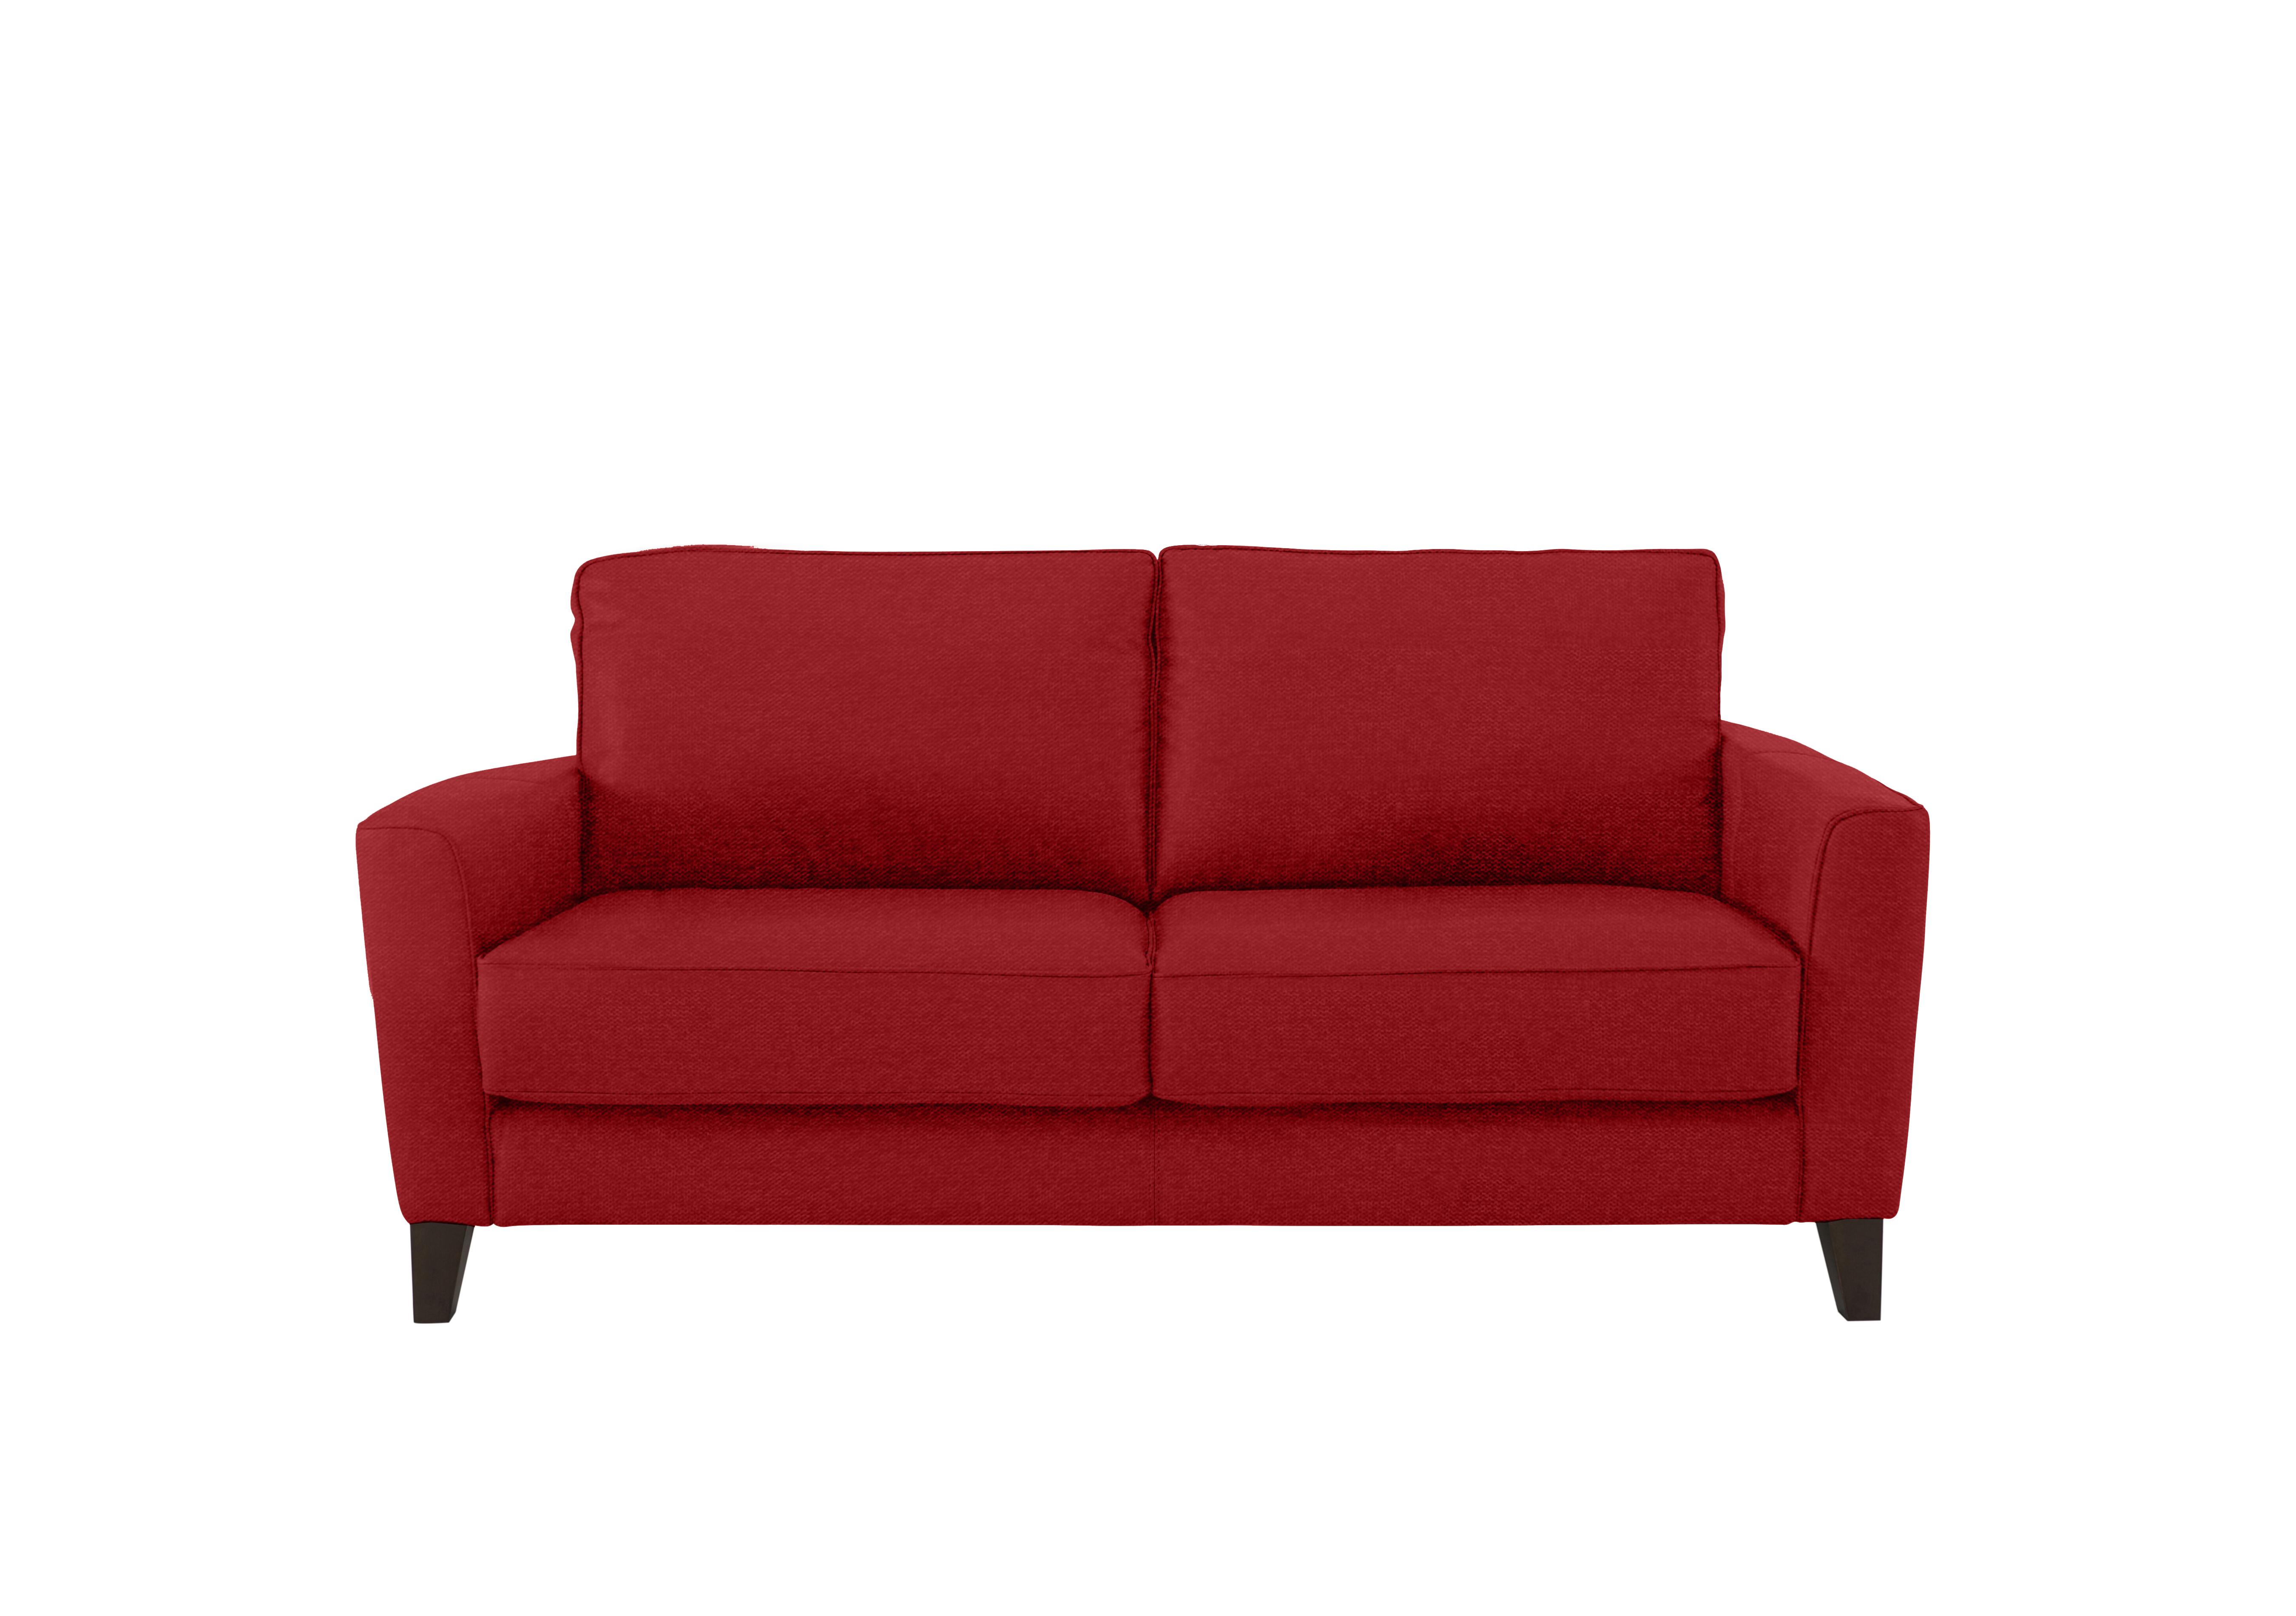 Brondby 2 Seater Fabric Sofa in Fab-Blt-R29 Red on Furniture Village